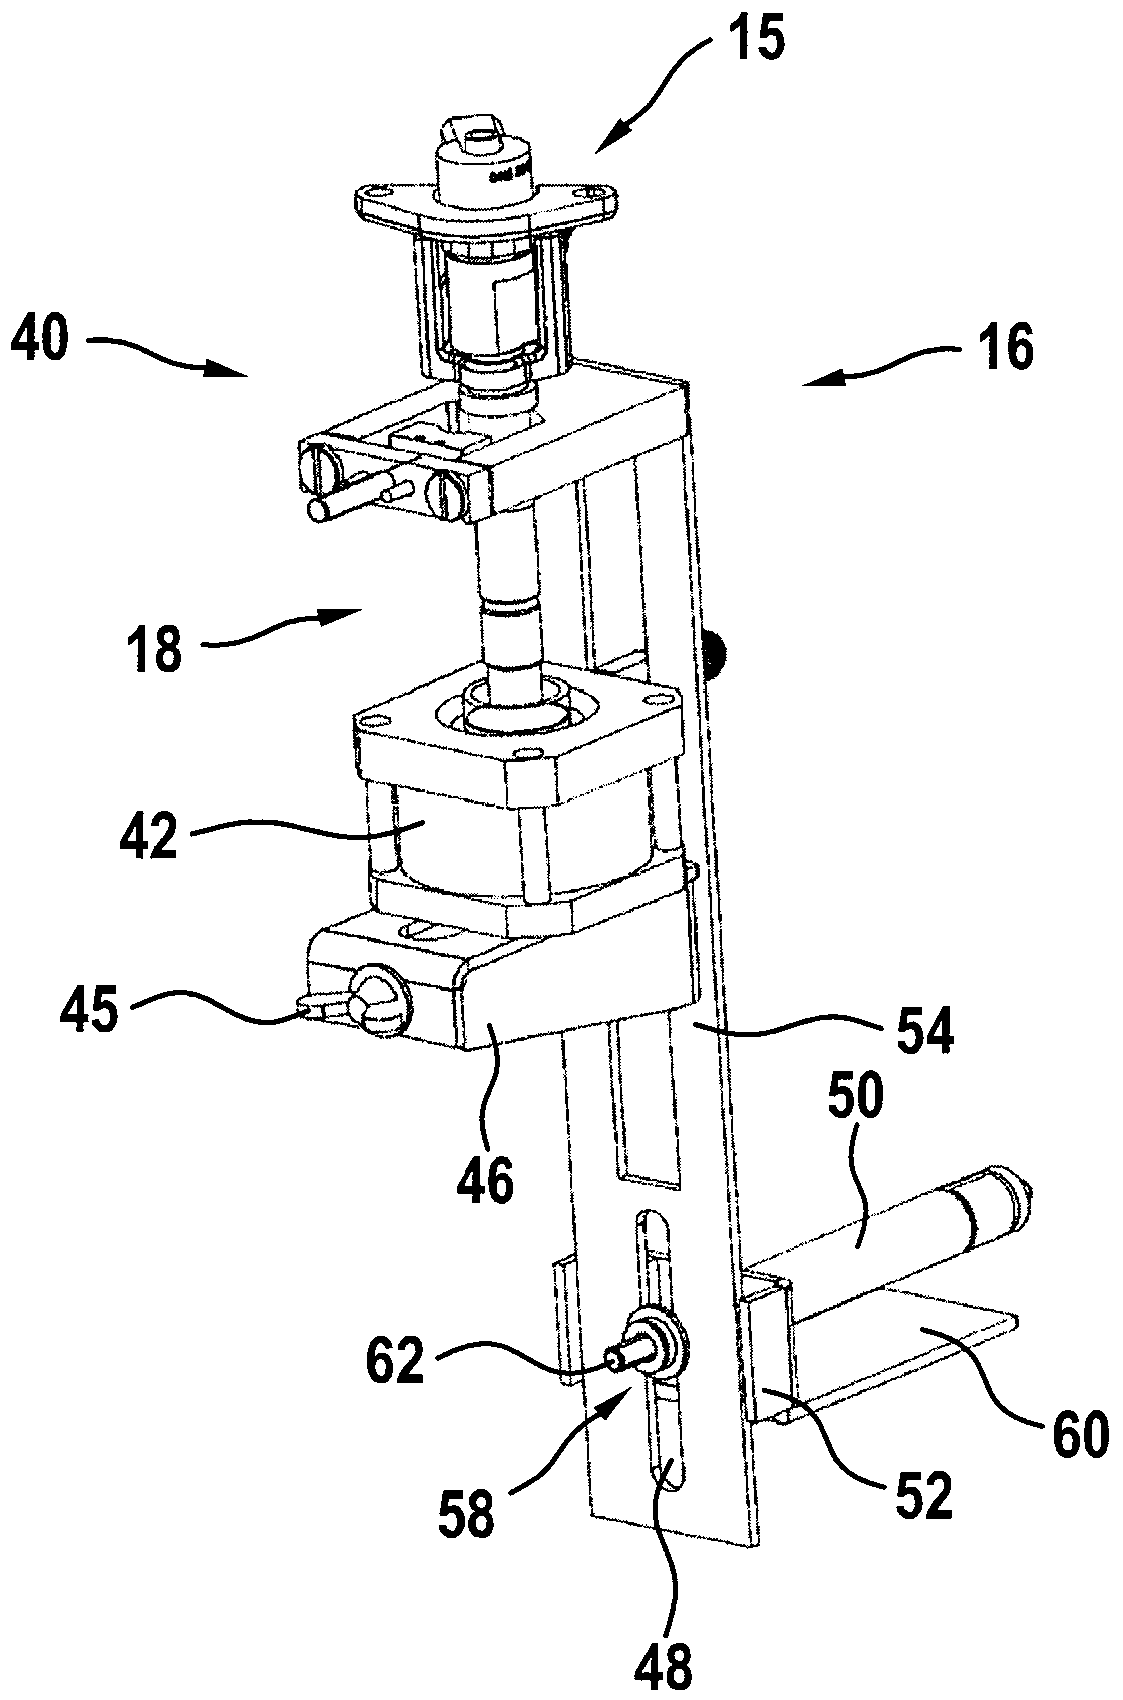 Injector test device